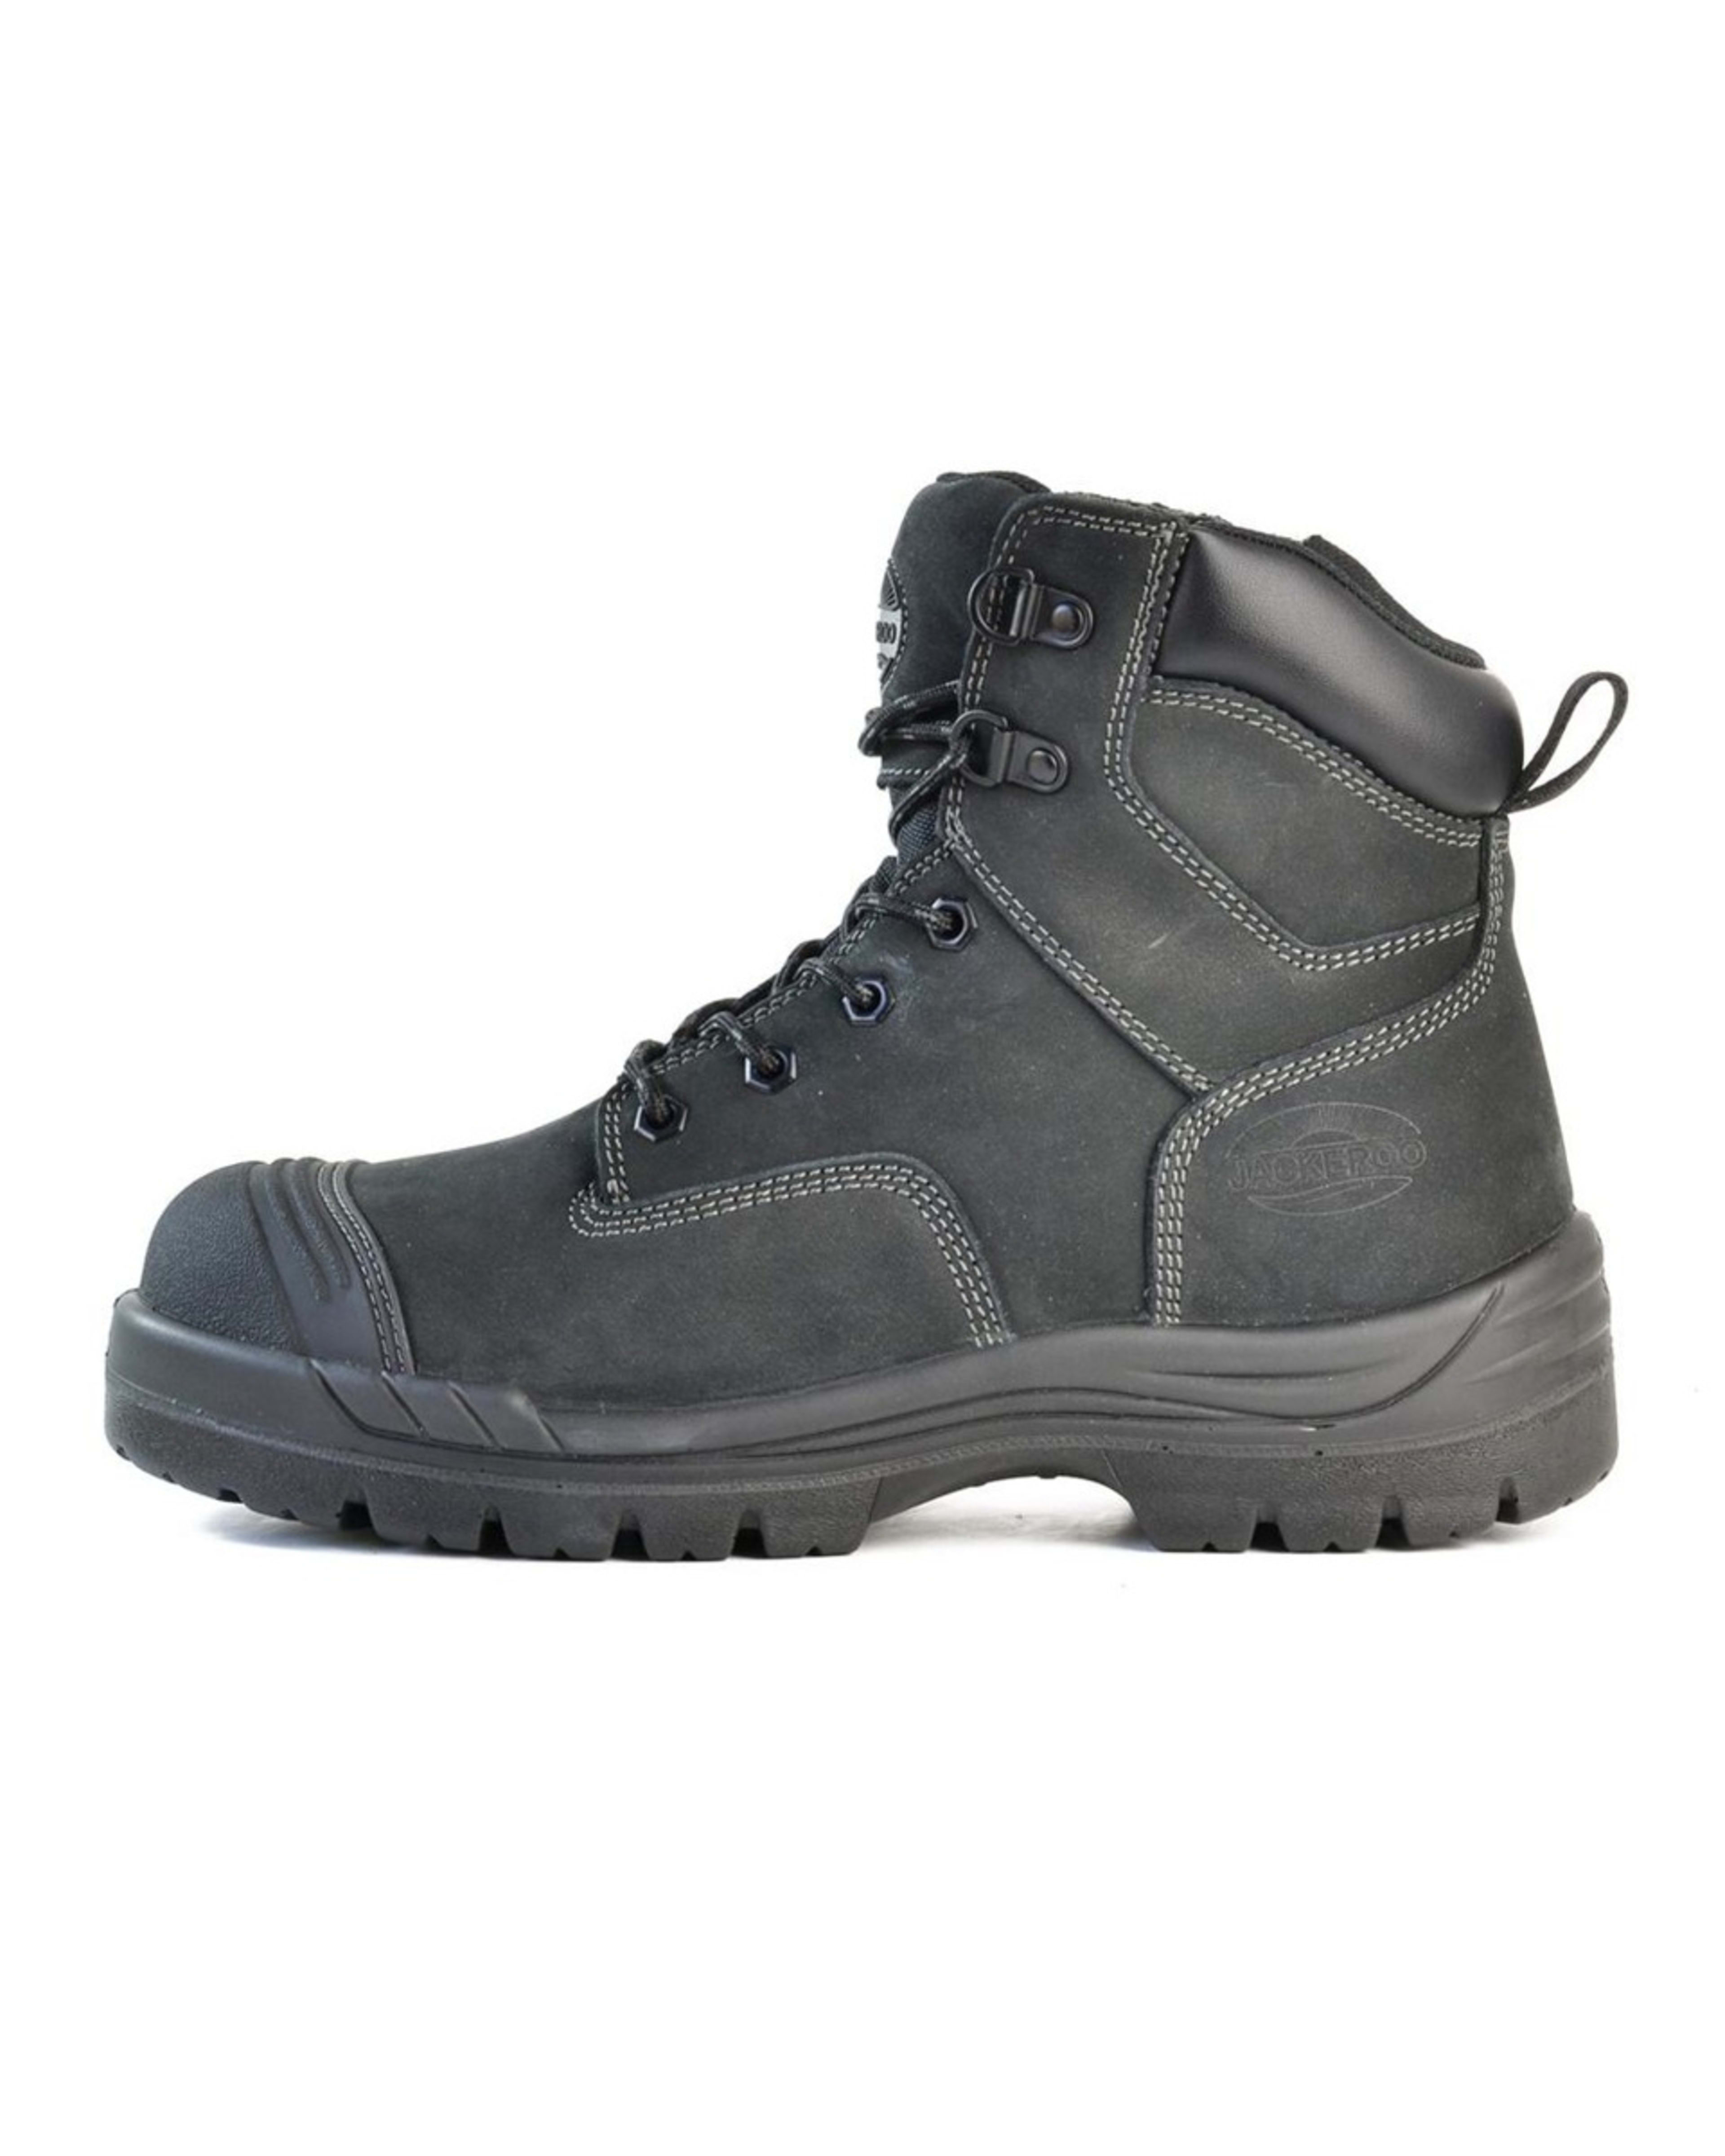 Digger Zip Sided Safety Boots - Kmart